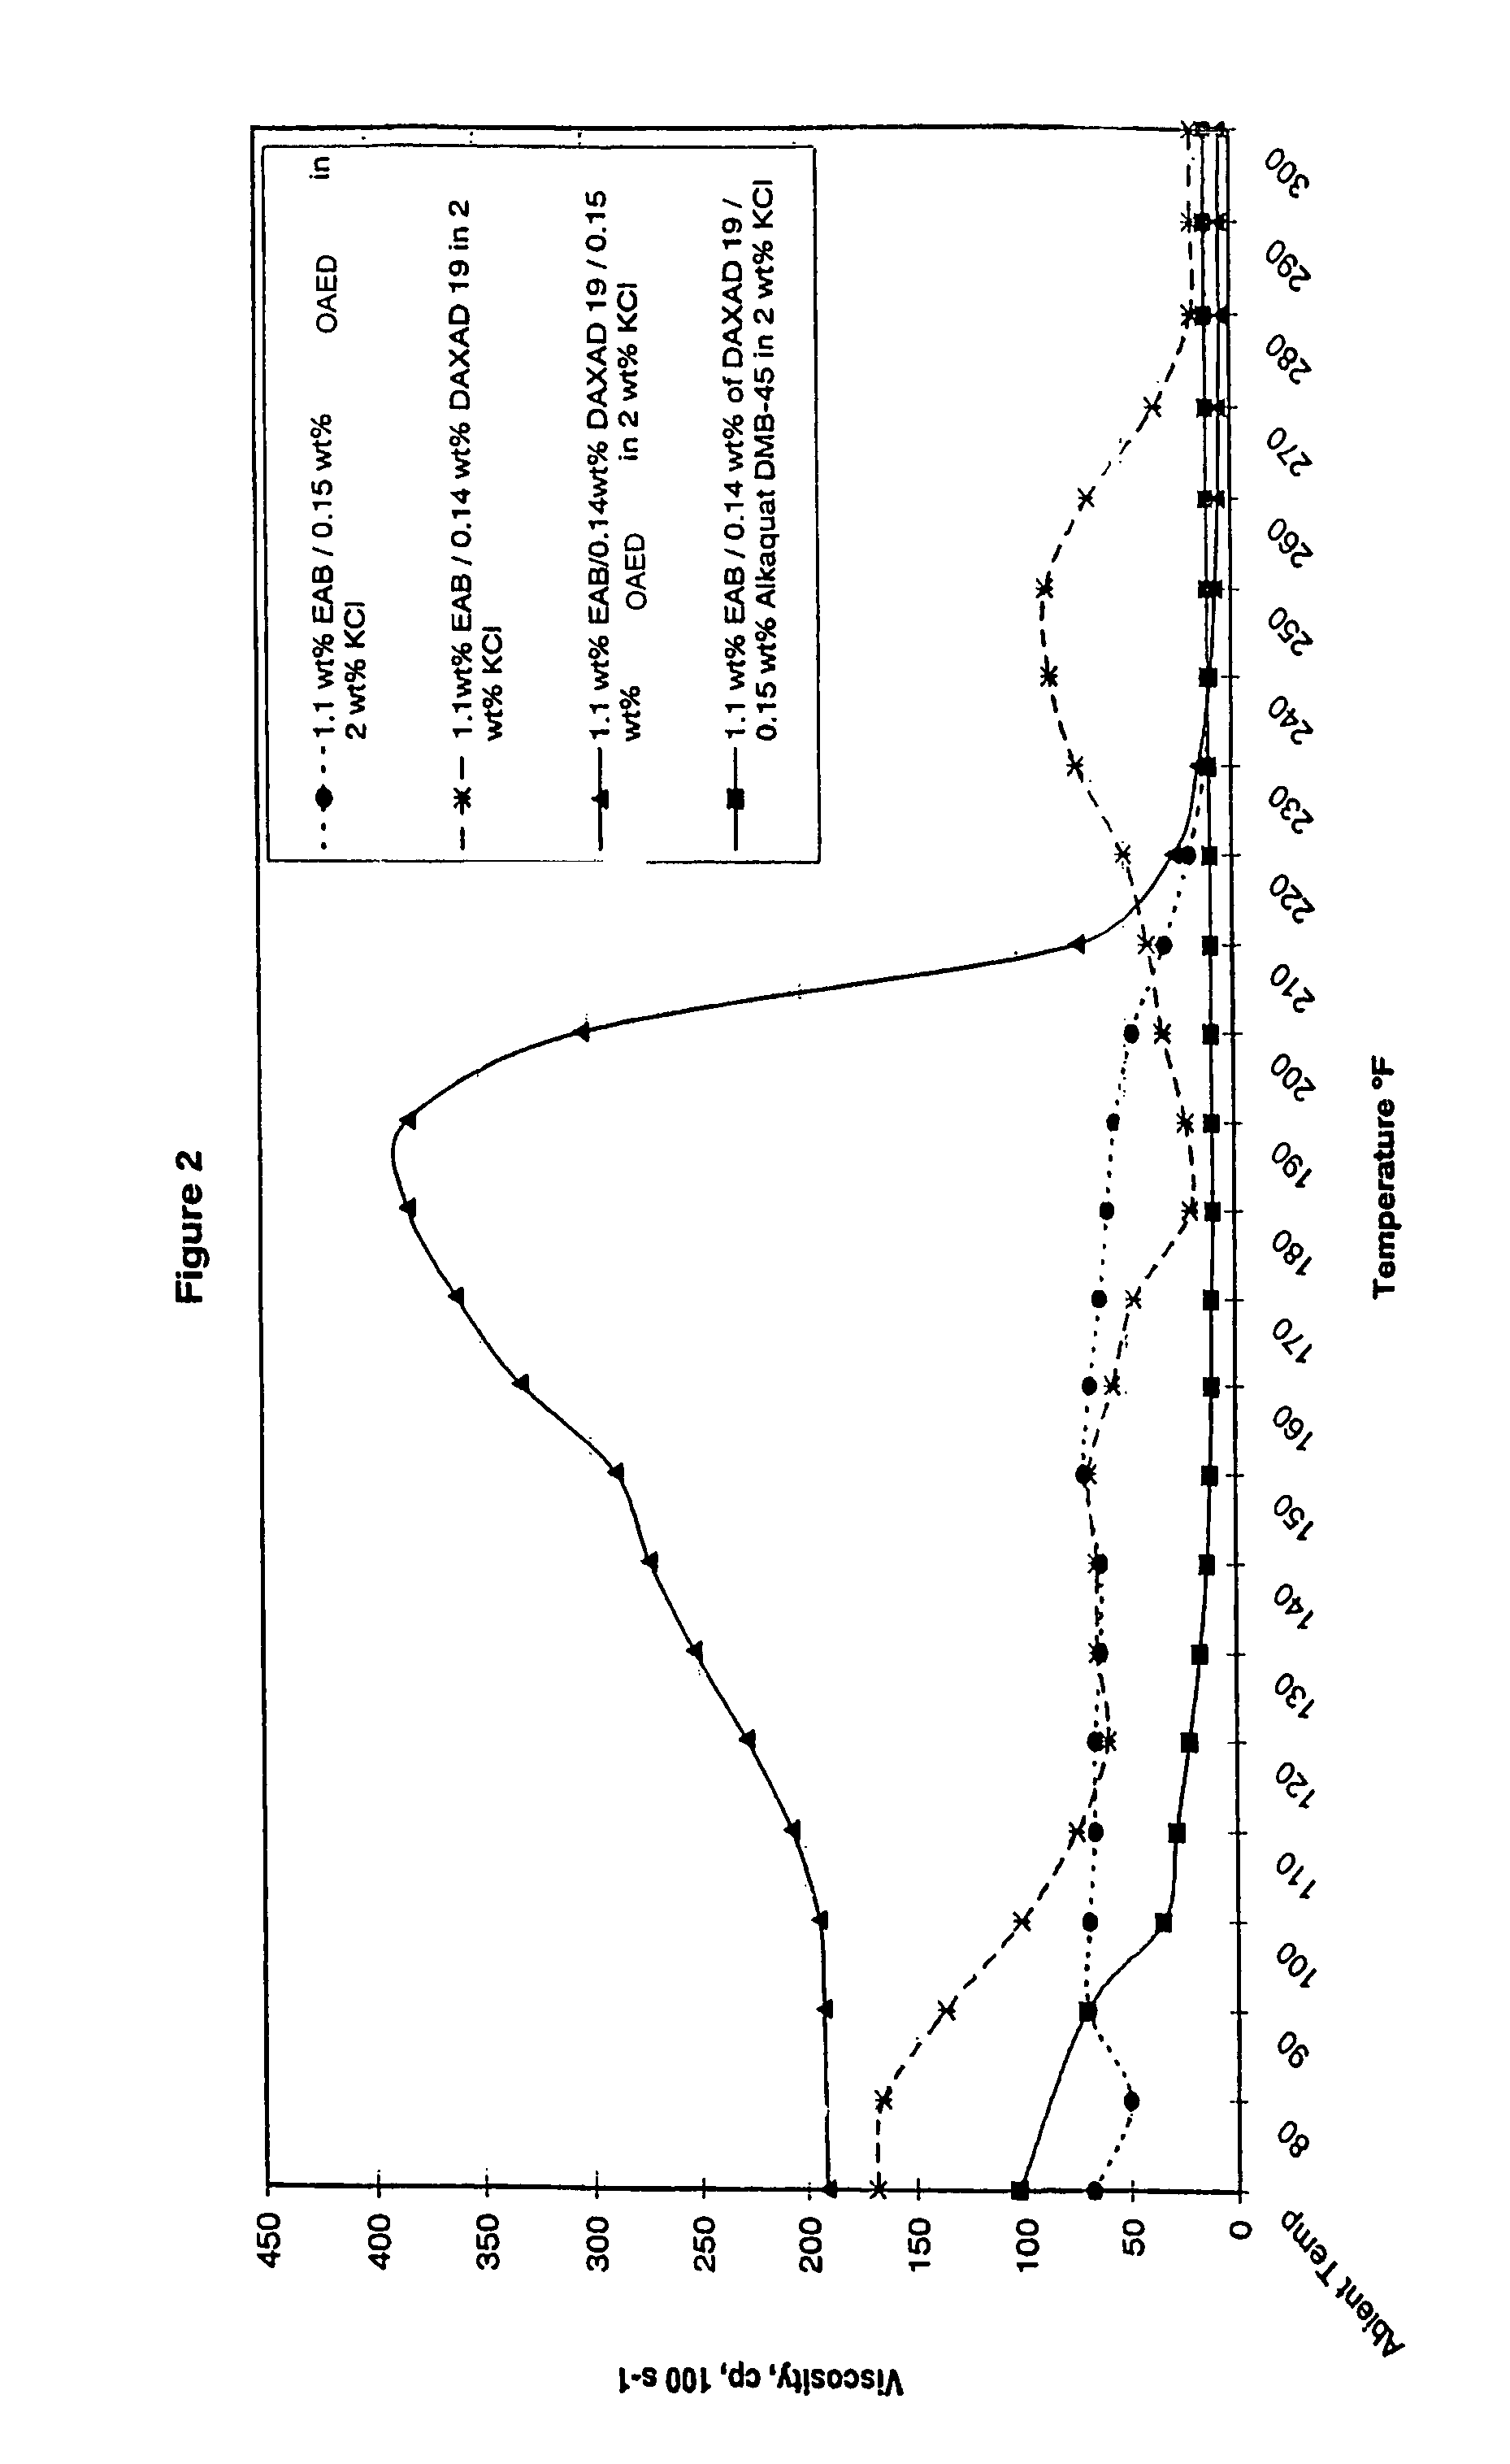 Multicomponent viscoelastic surfactant fluid and method of using as a fracturing fluid